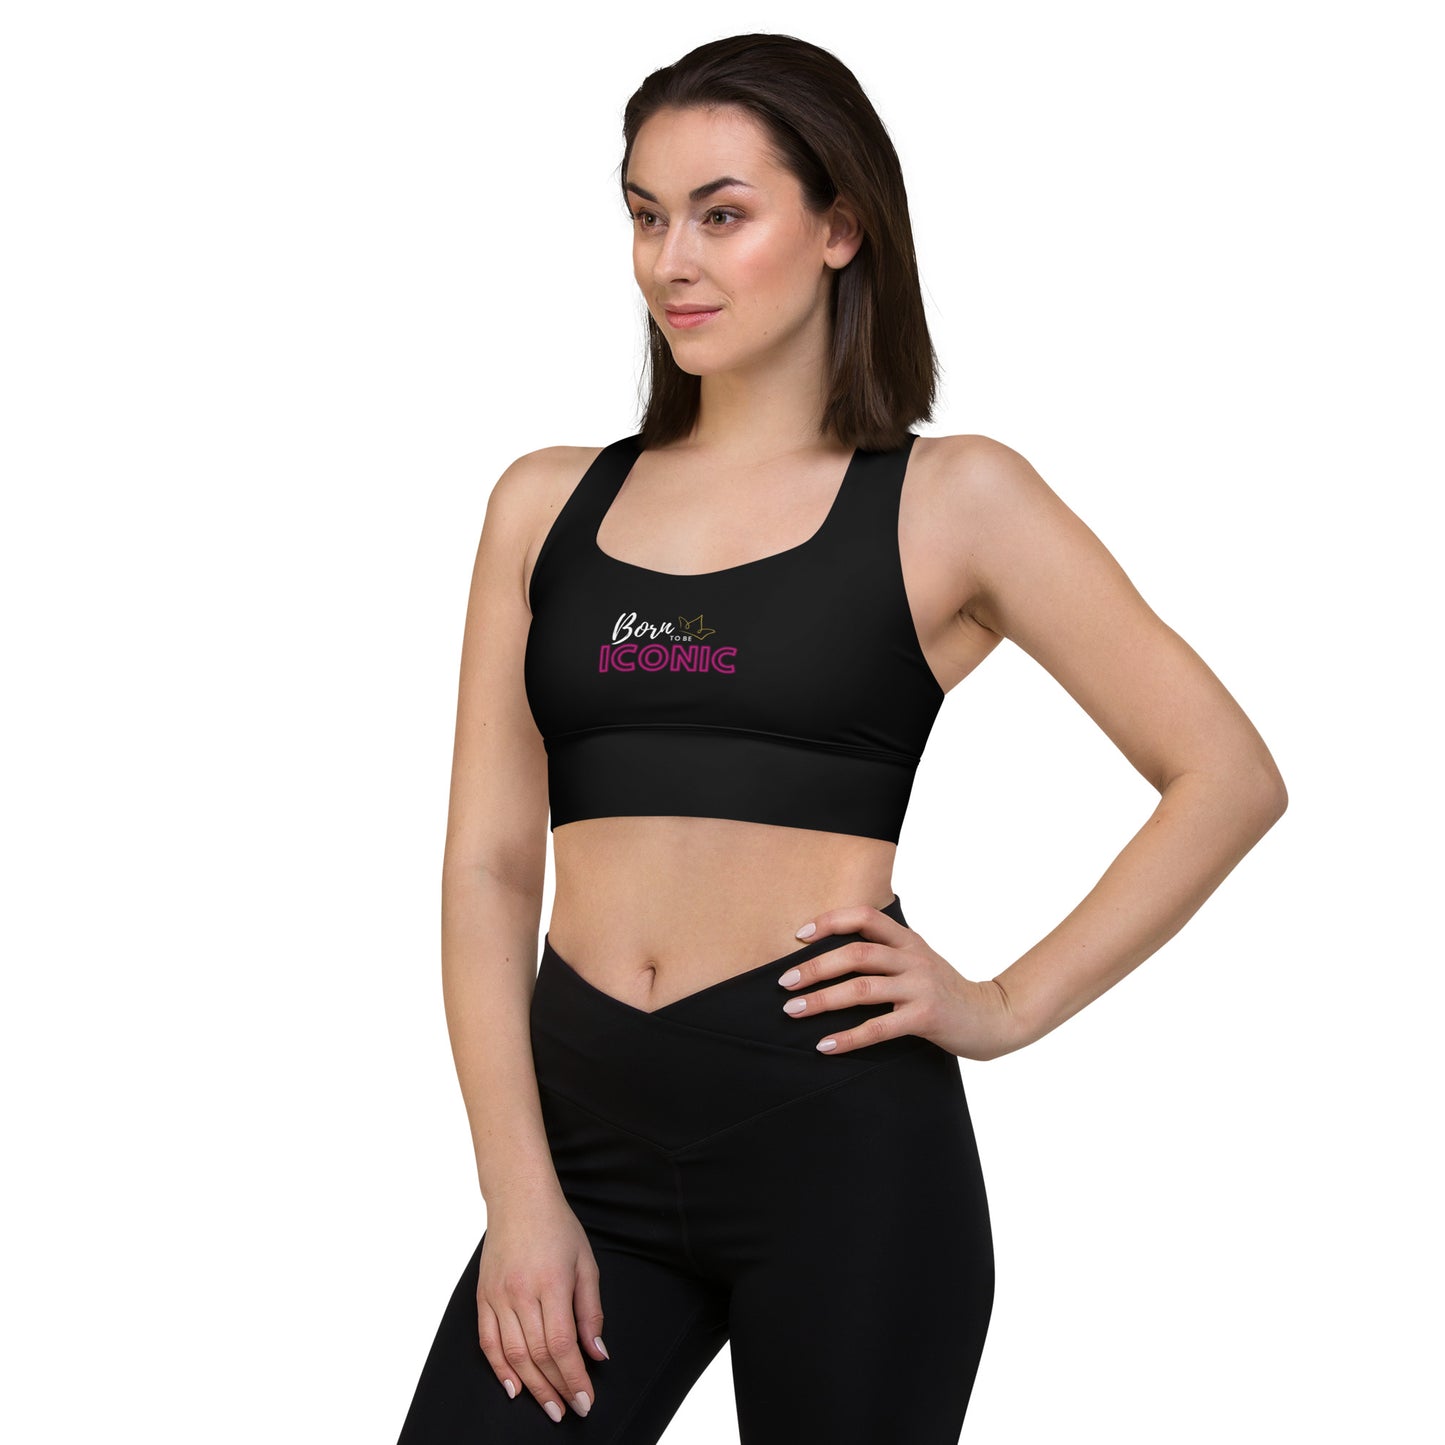 Born to Be ICONIC Max Support sports bra